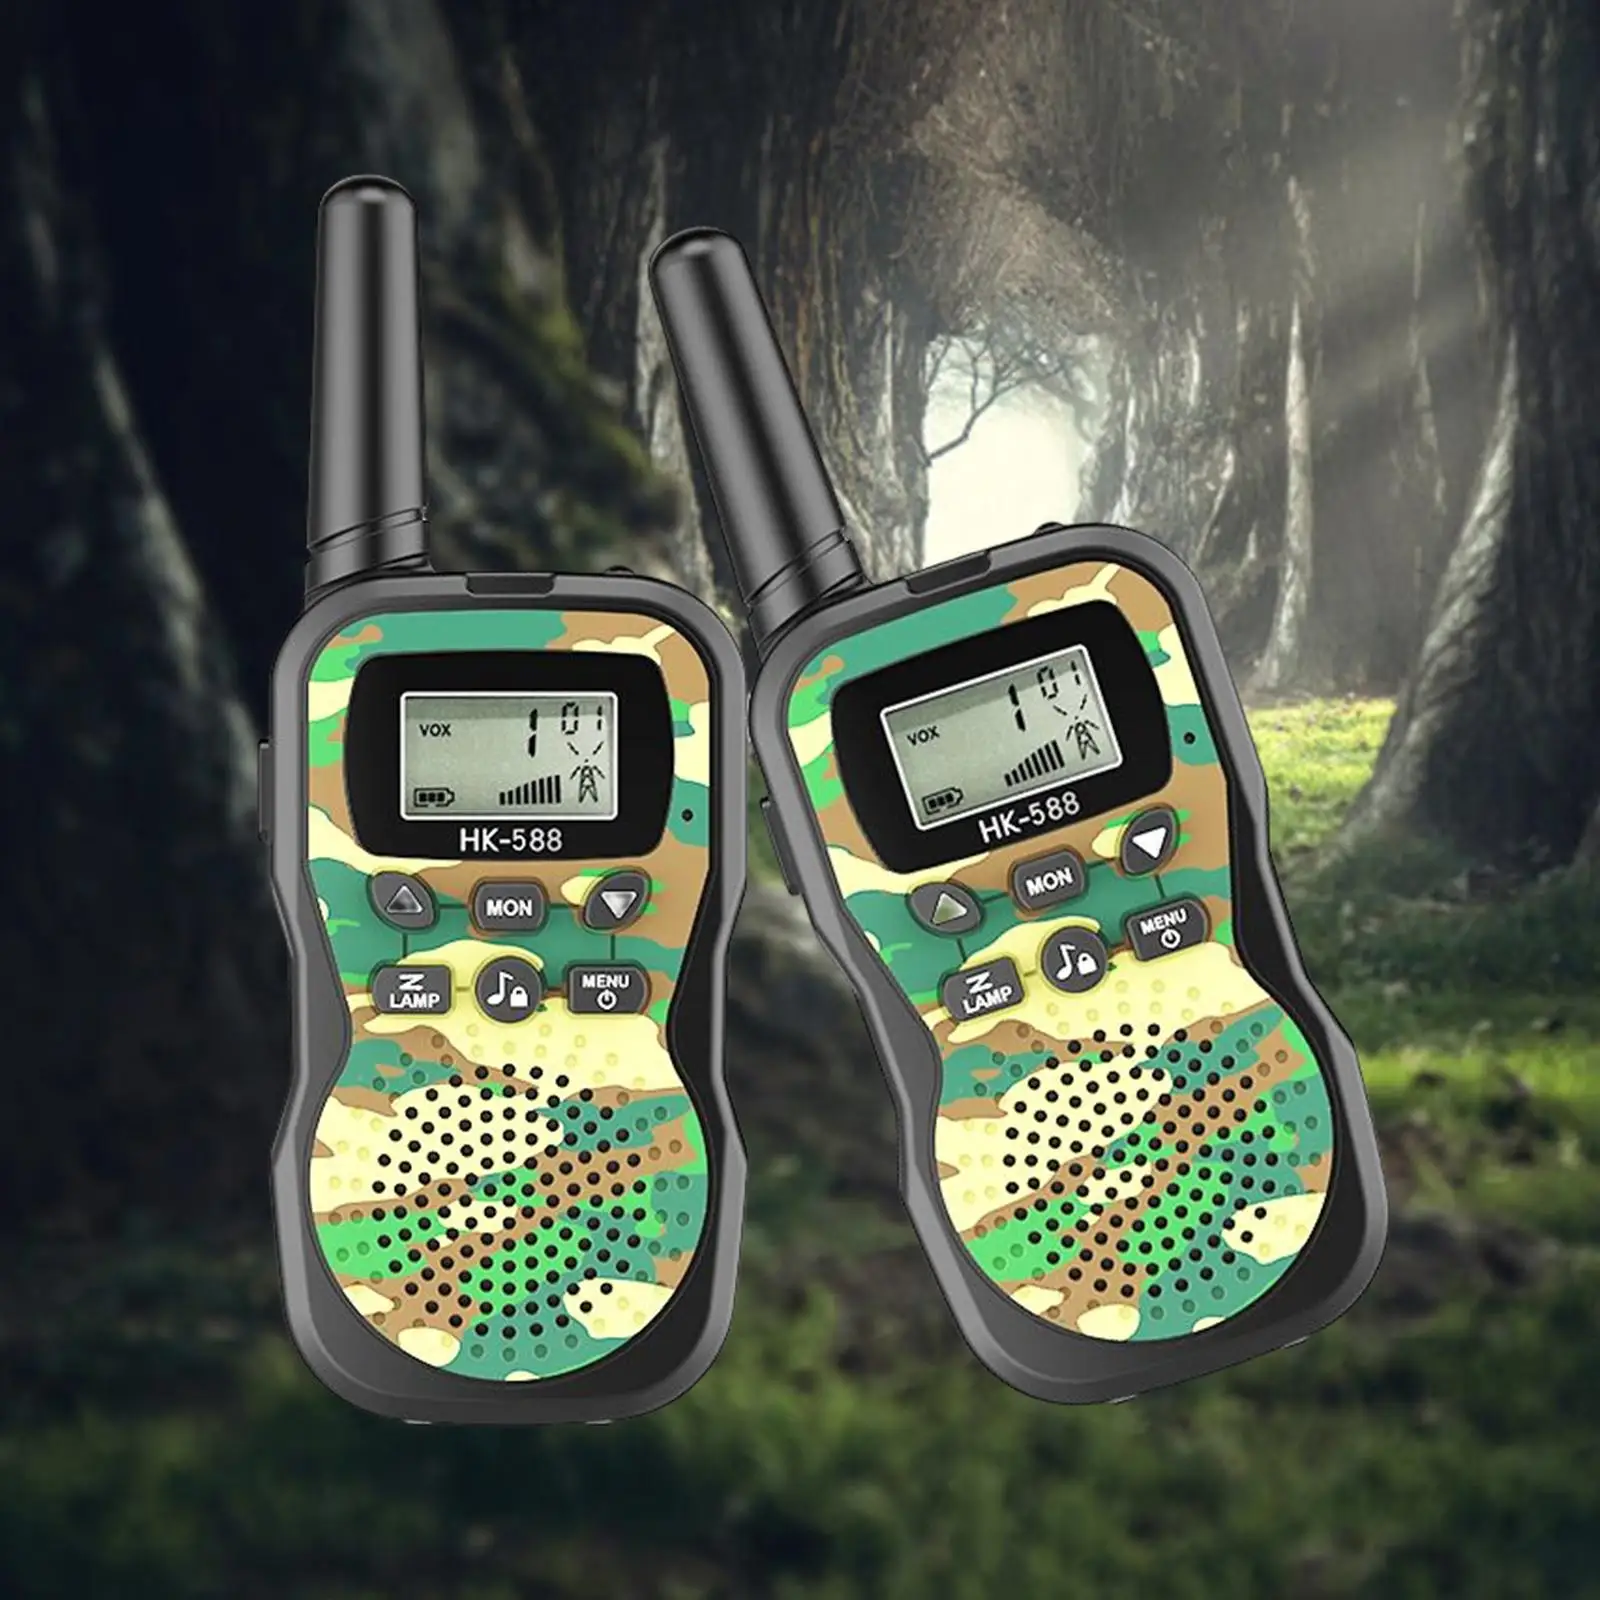 Outdoor Kids Walkie Talkies Toy 2 Way Radios Children Toy for Kids Aged 3 and up Good Performance Smooth Edges Interactive